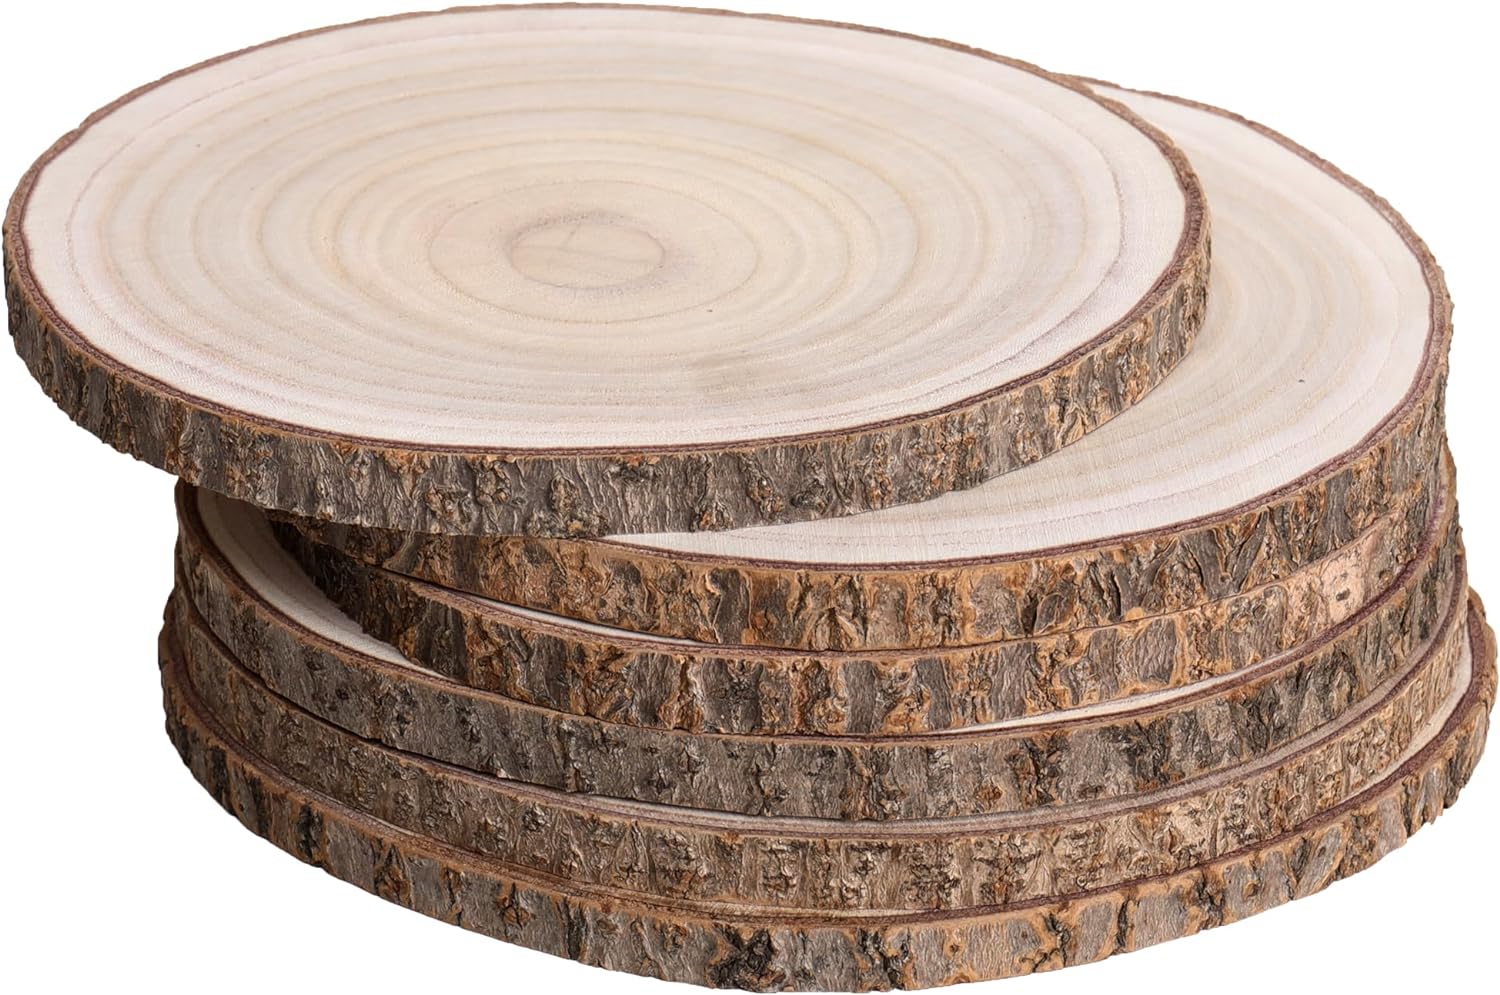 10 Pack Discount Large Wood Slices Discount Wood Slices for Wood Slice Art  and Crafts Assorted Wood Slices Budget Wood Slices 